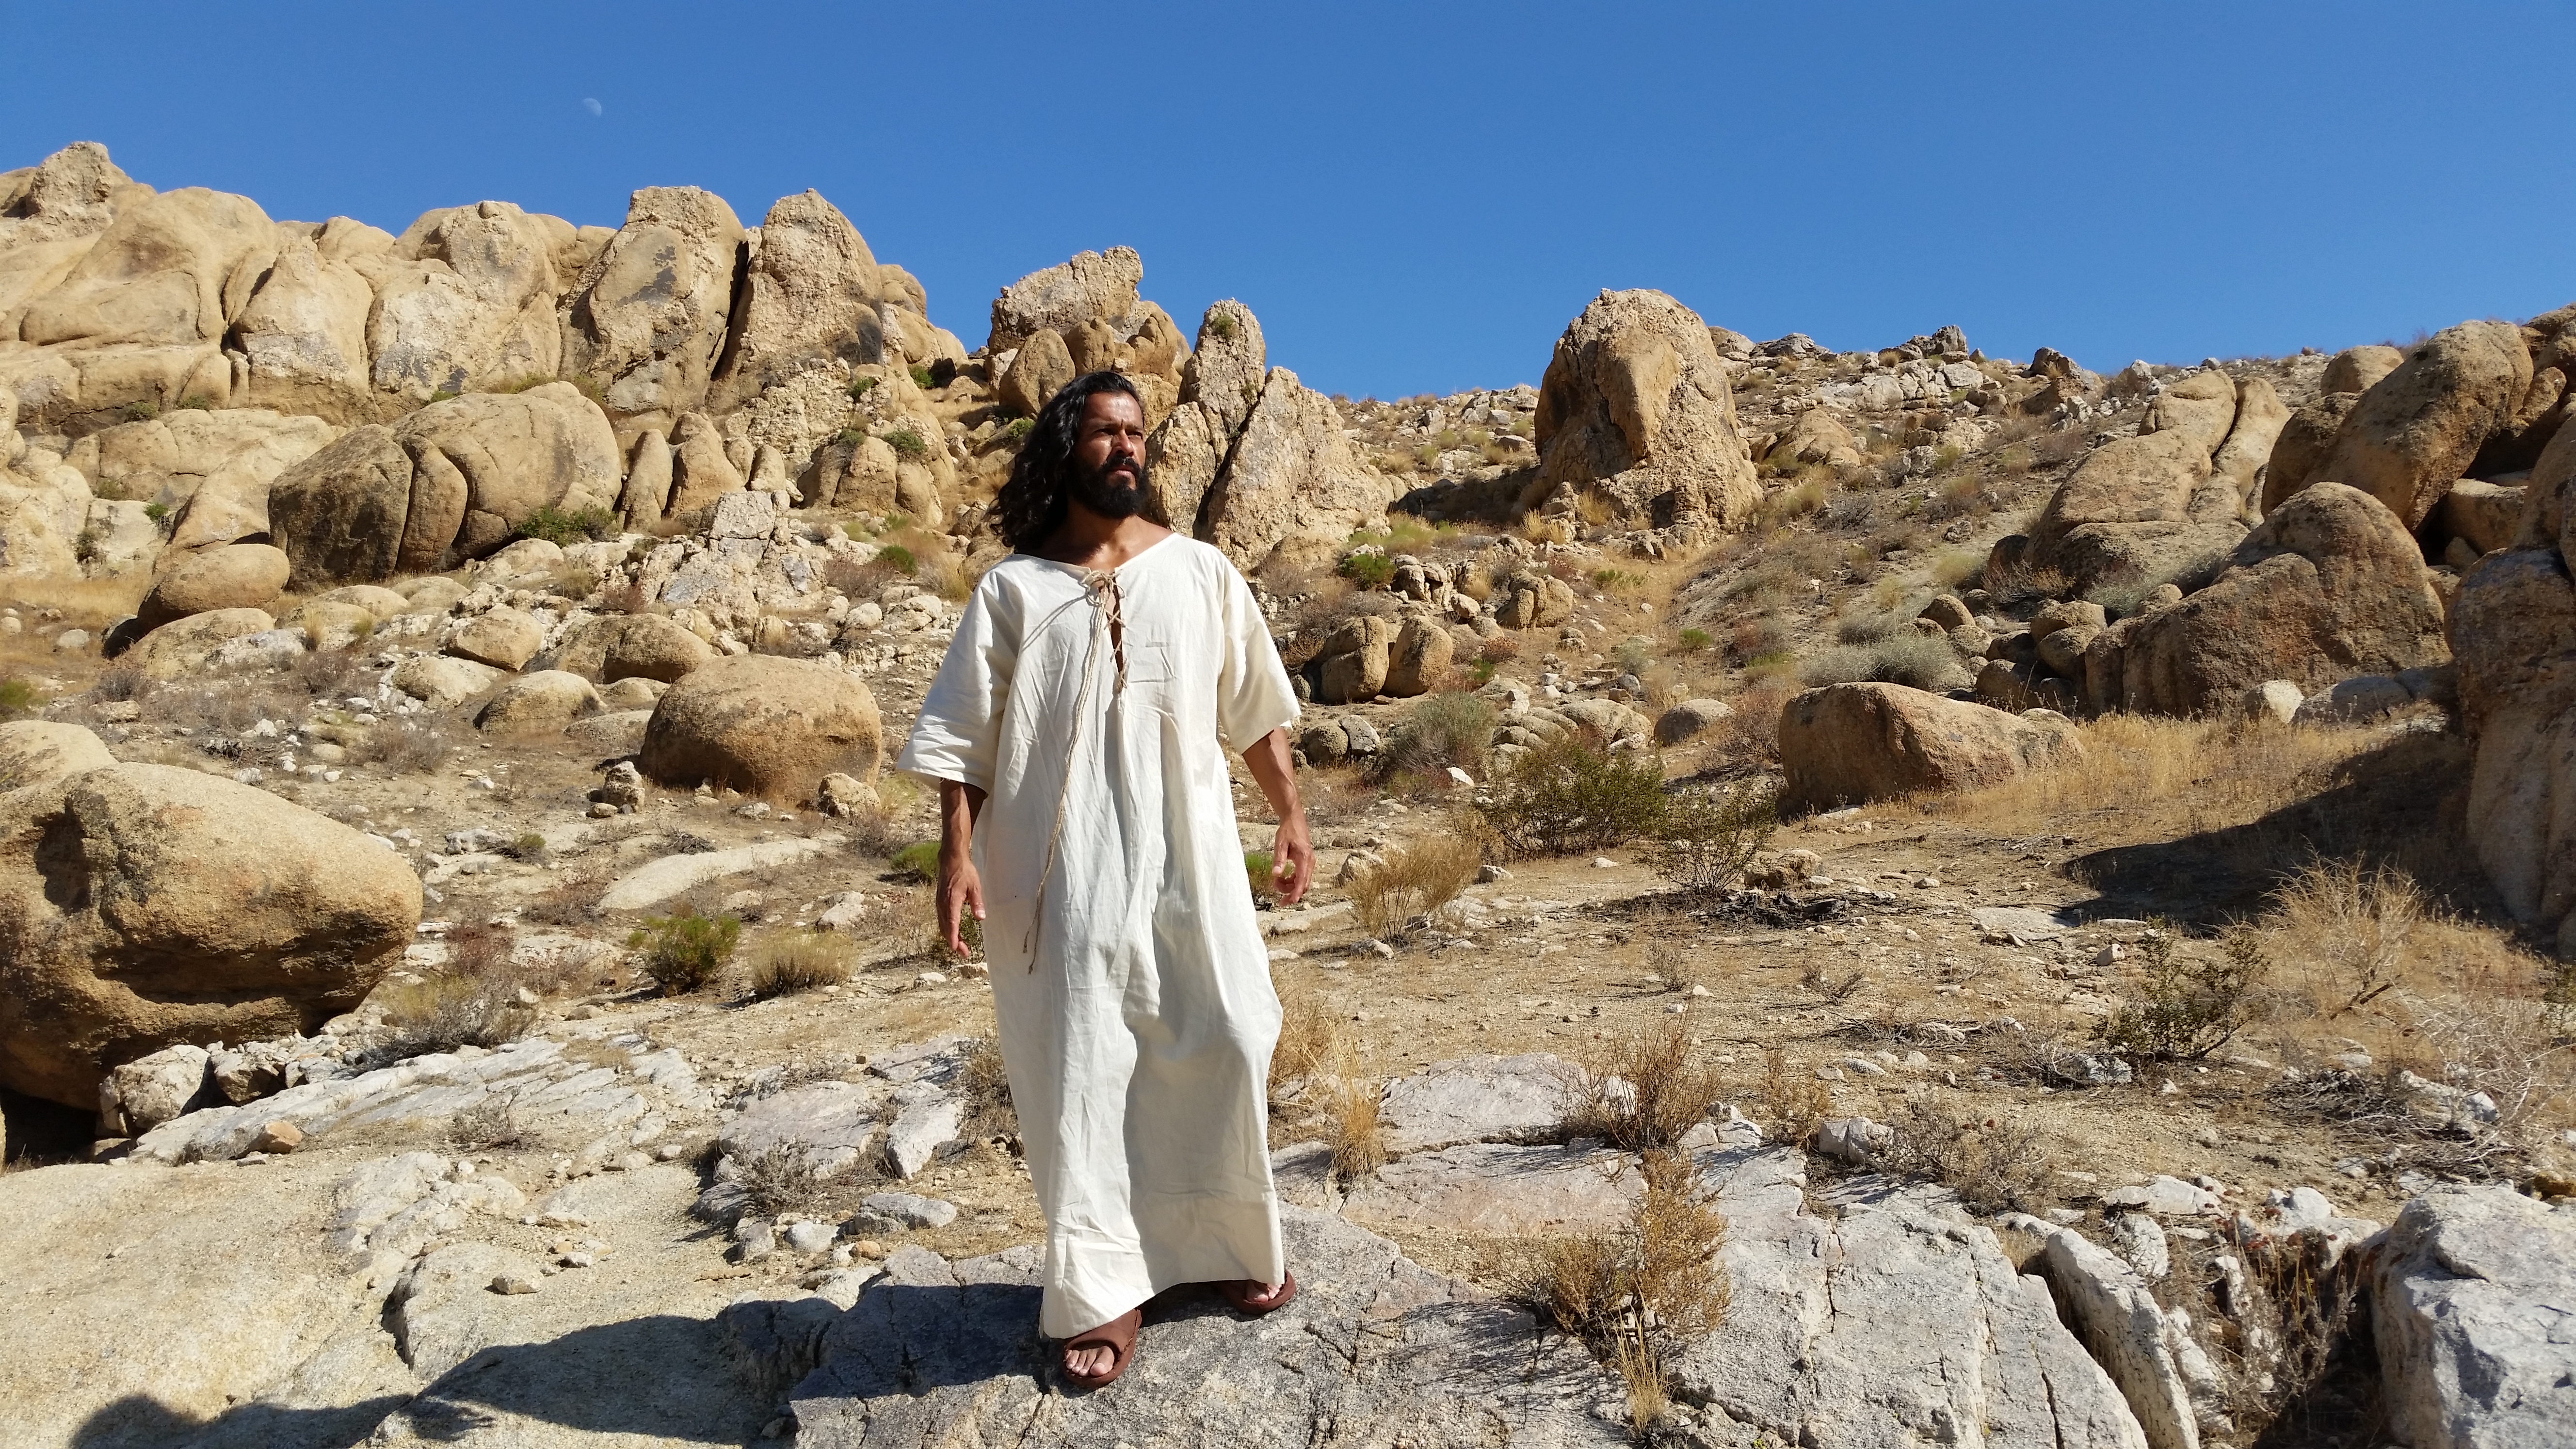 The Second Coming Of Christ Director Daniel Anghelcev The Mohave Desert August 2014